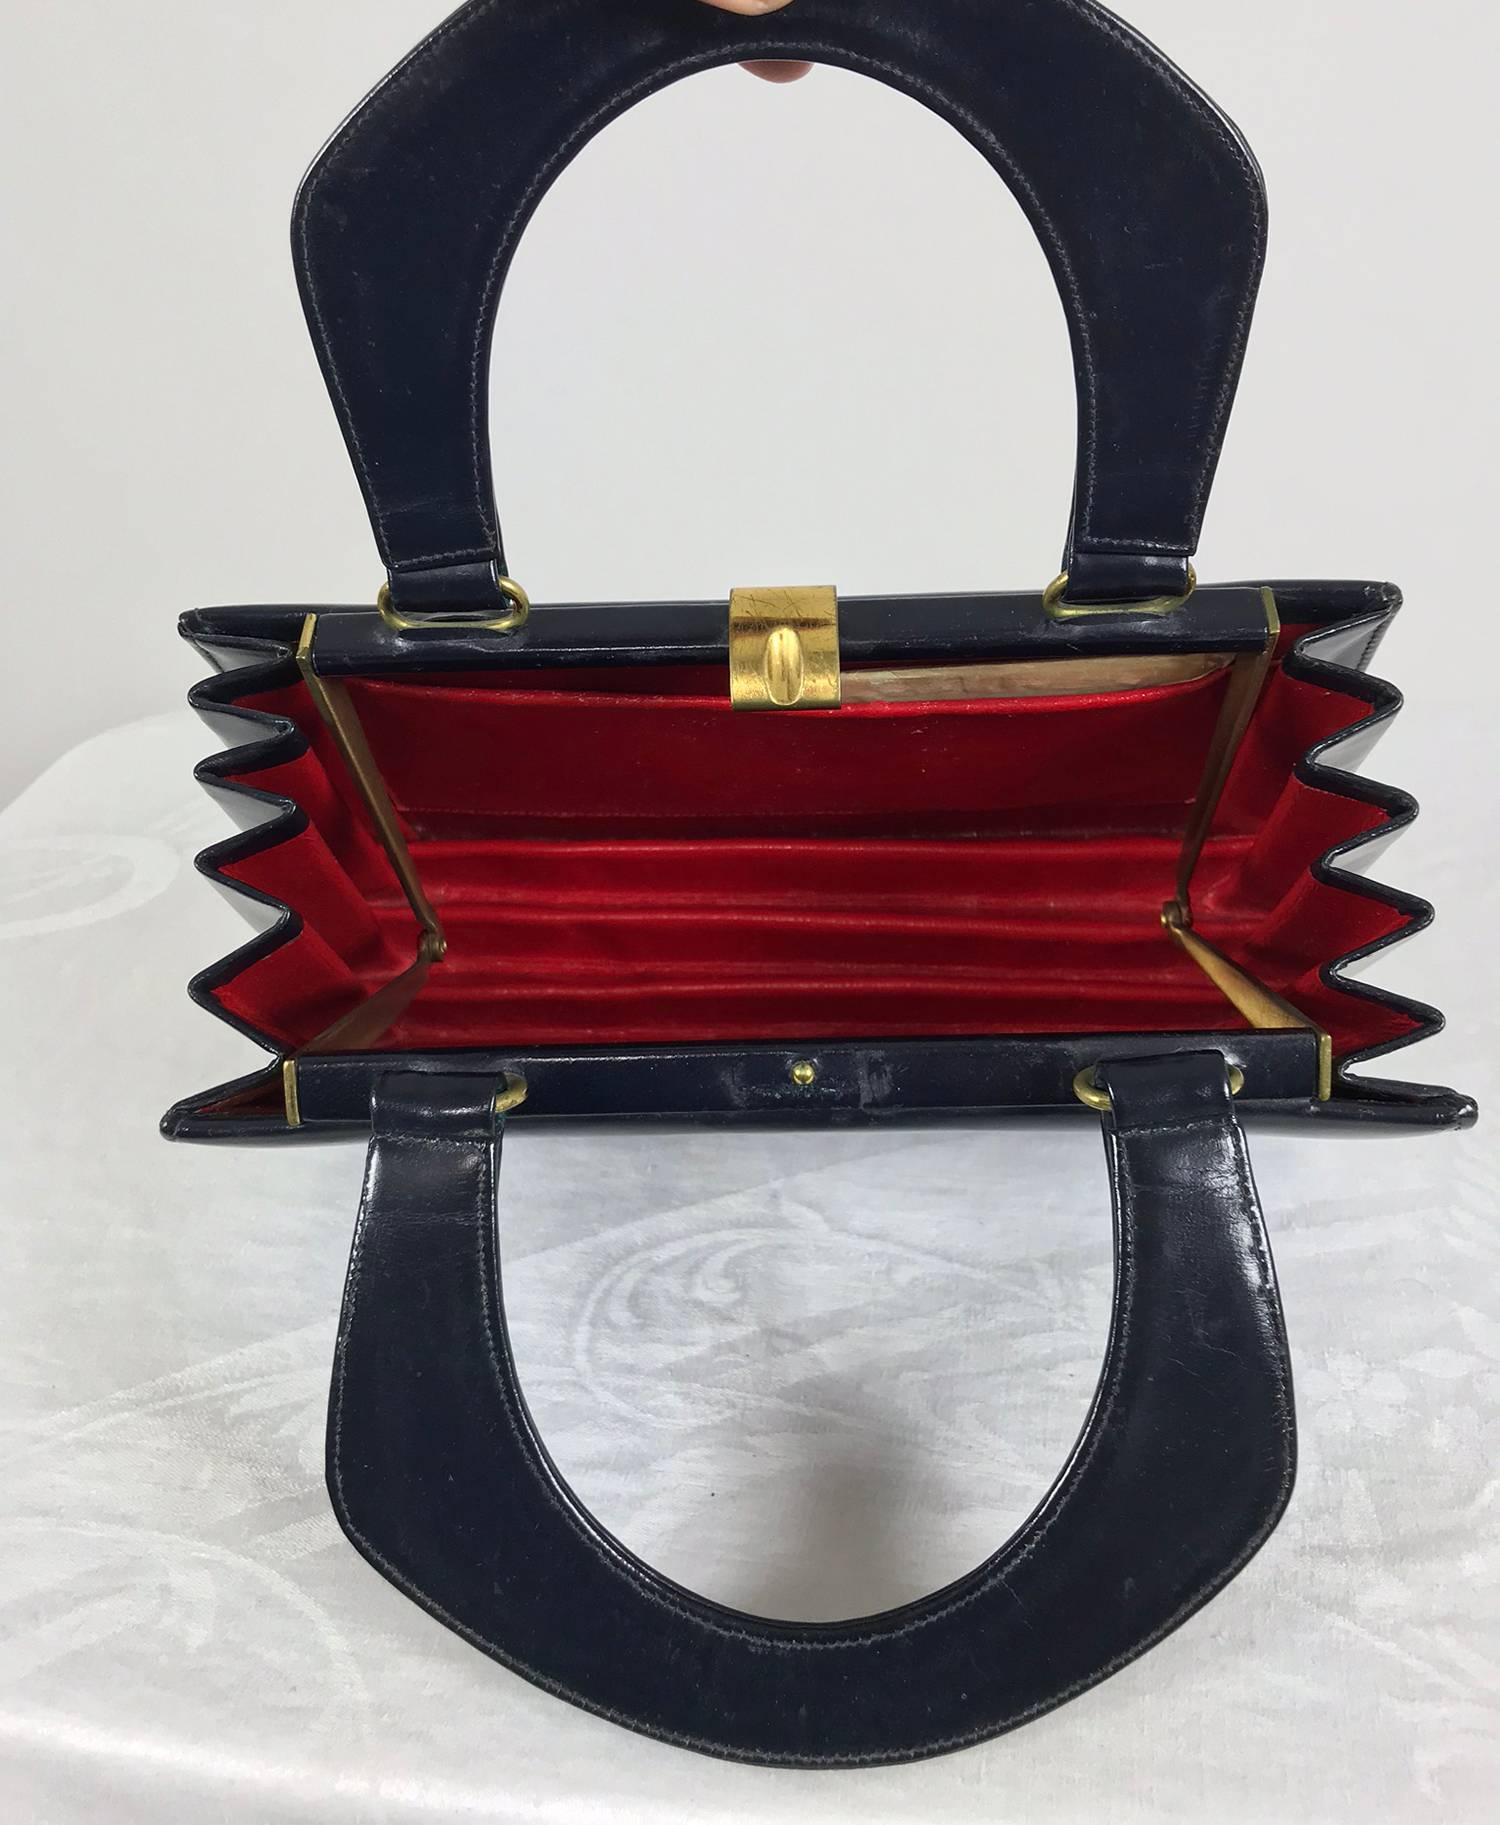 Susan Gail Original navy blue box calf Accordion handbag from the 1950s. Structured bag with in internal frame and shaped double handles. Brass hardware with a clasp opening at the top, there are some scratches on the clasp. The interior is lined in